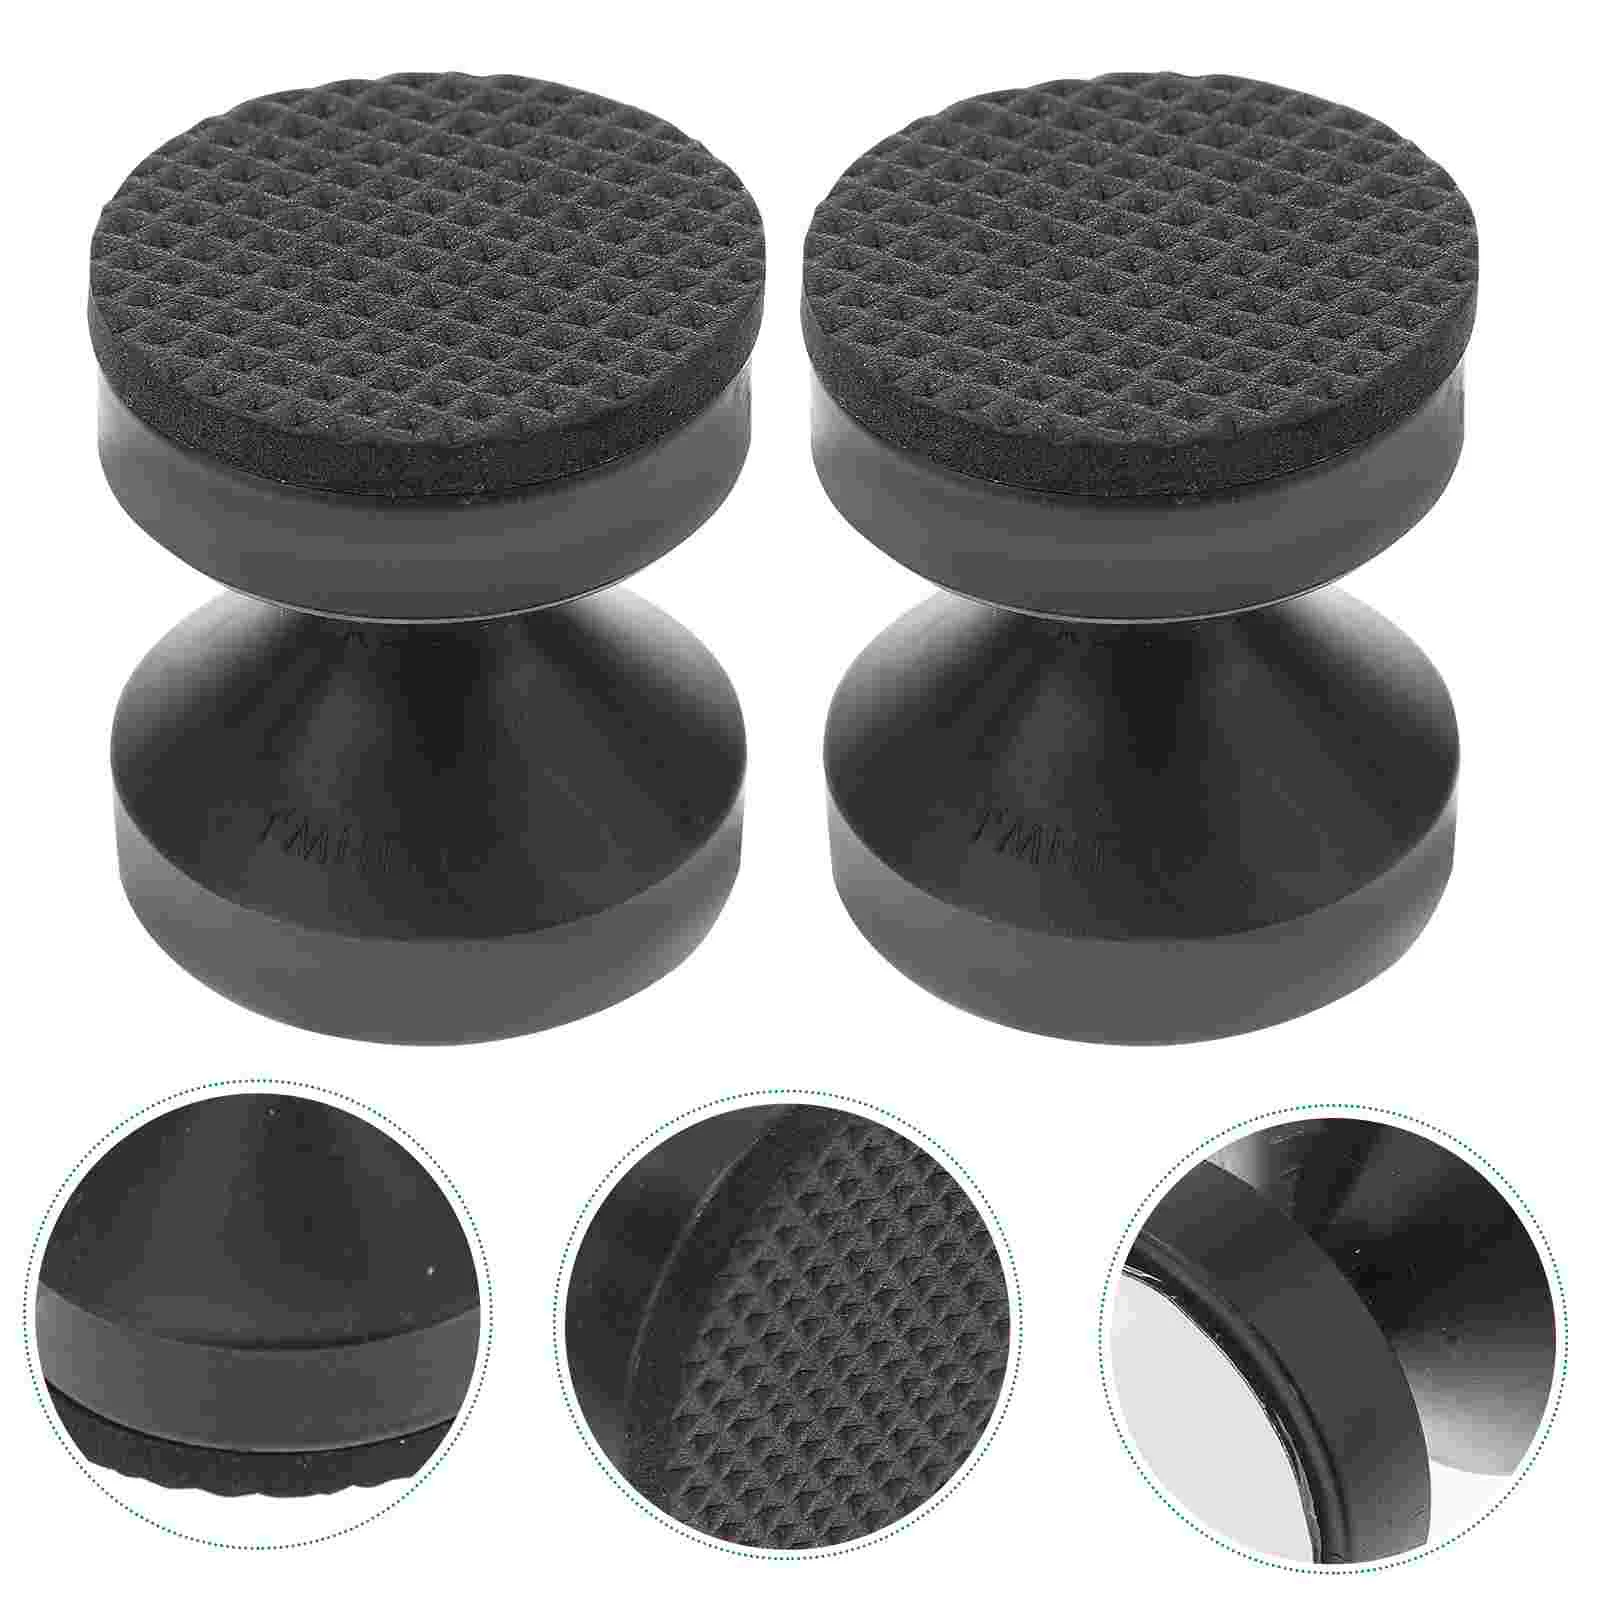 

4 Pcs Furniture Fall Preventer Headboards Bumpers for Wall Adjustable Bed Frame Brackets Cabinet Stoppers Plastic Noise